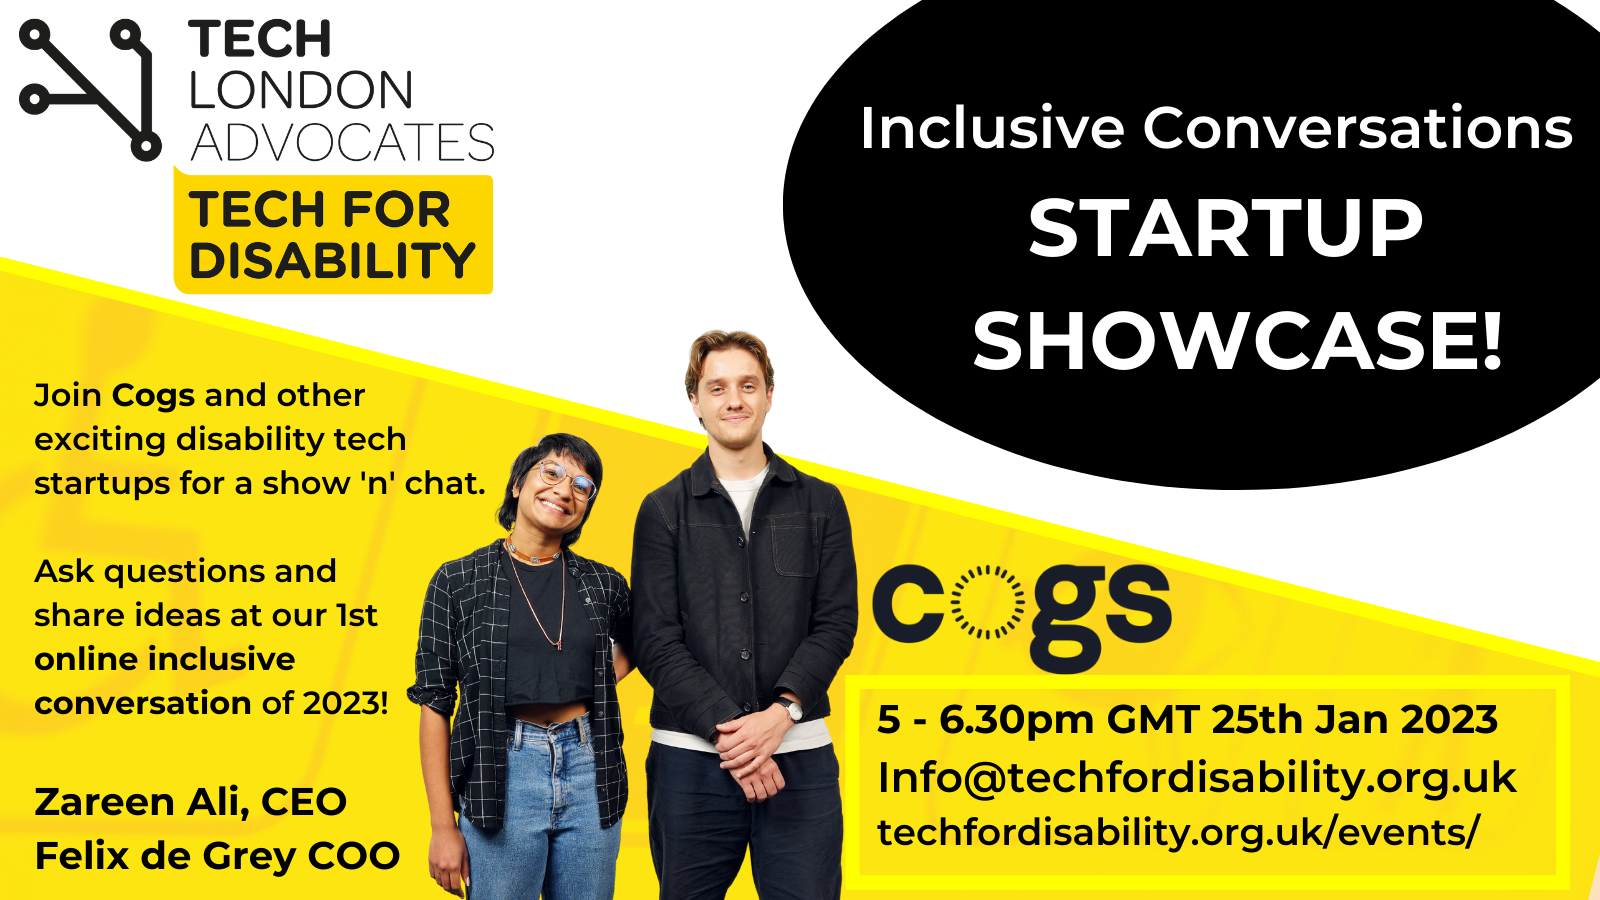 Photos of man and woman from Cogs AI. Startup showcase is on black circle. Tech For Disability logo on white.